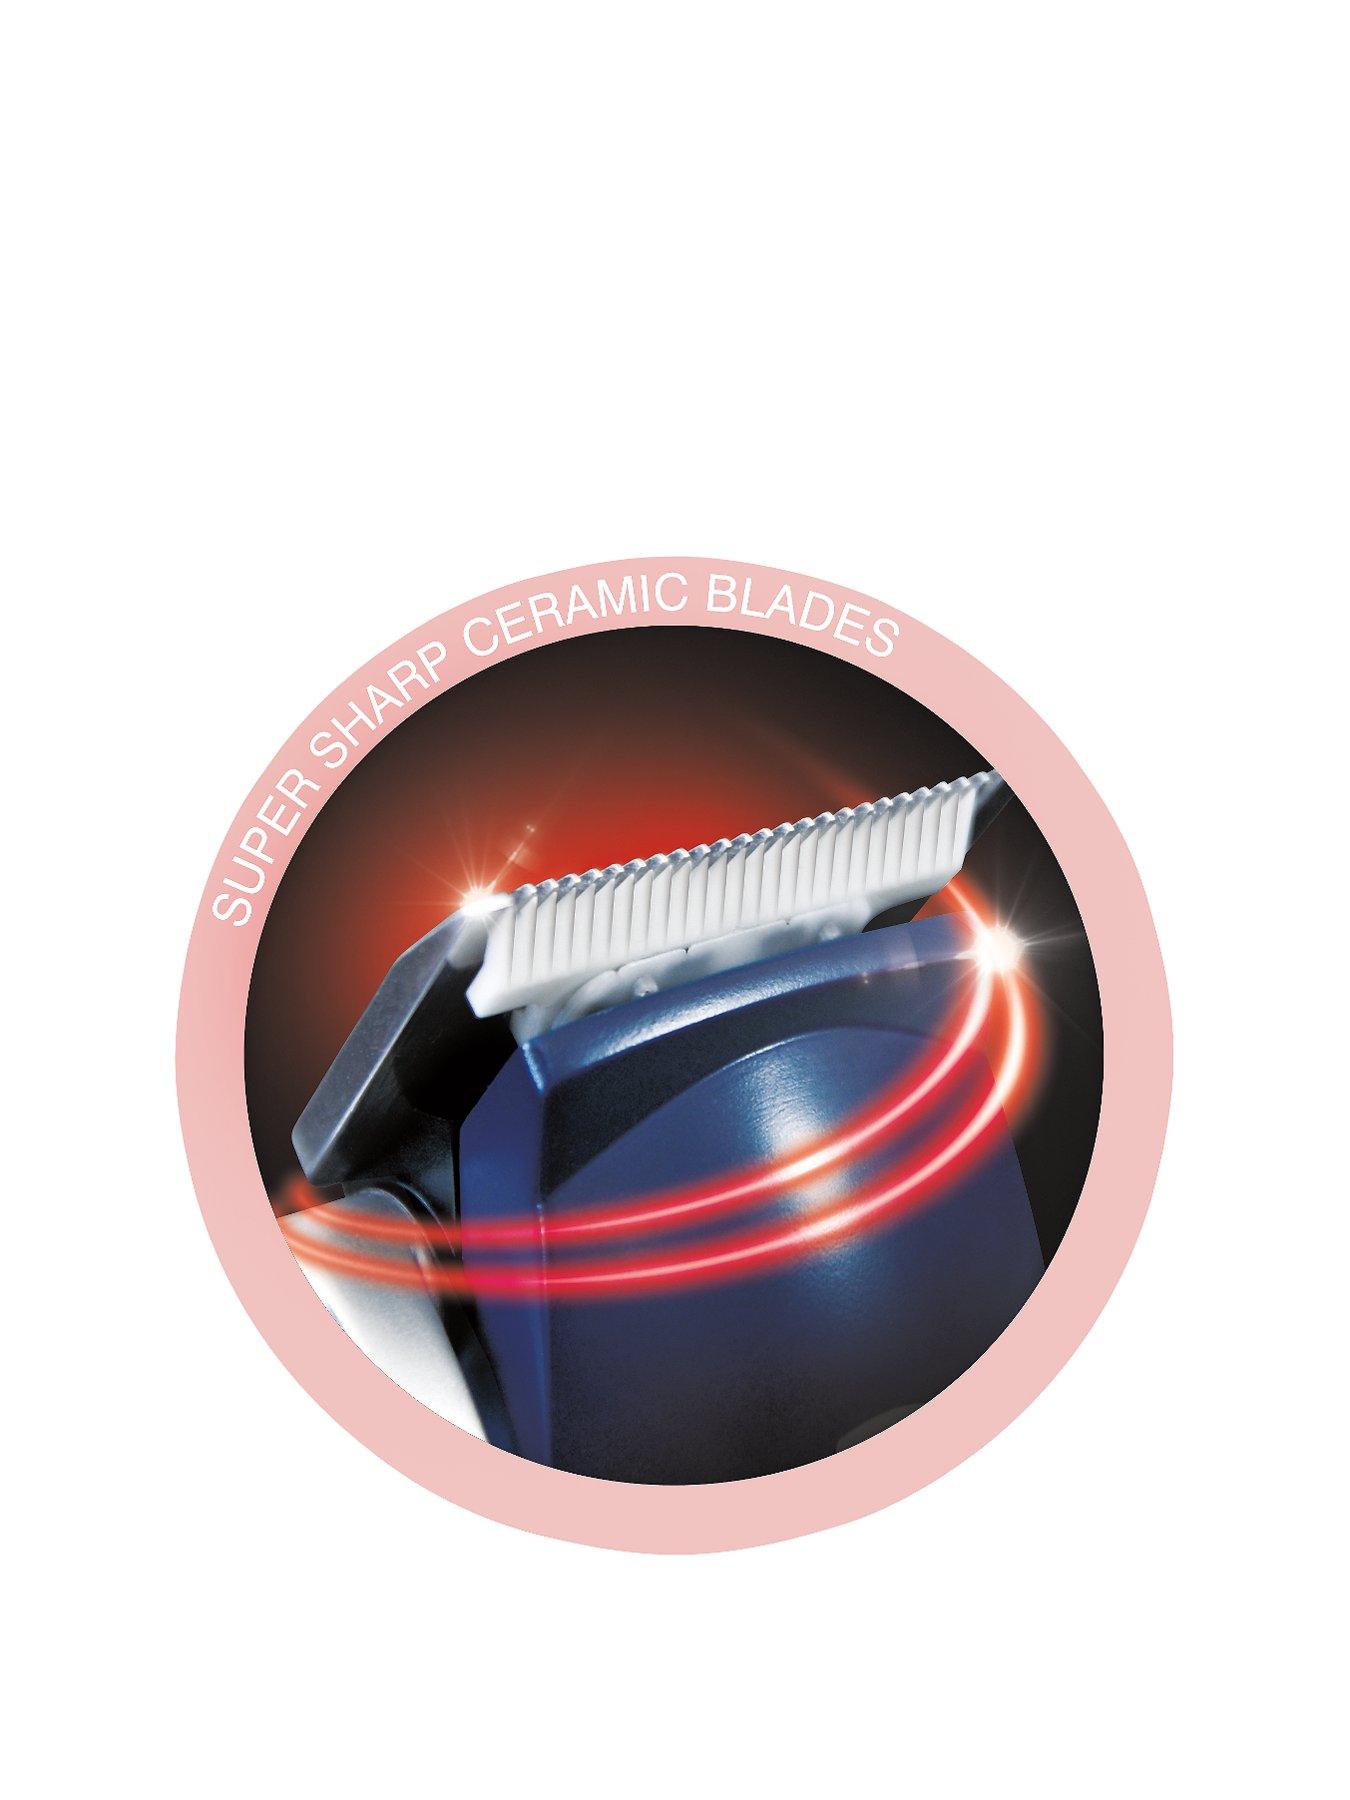 babyliss for men ceramic smooth cut hair clipper